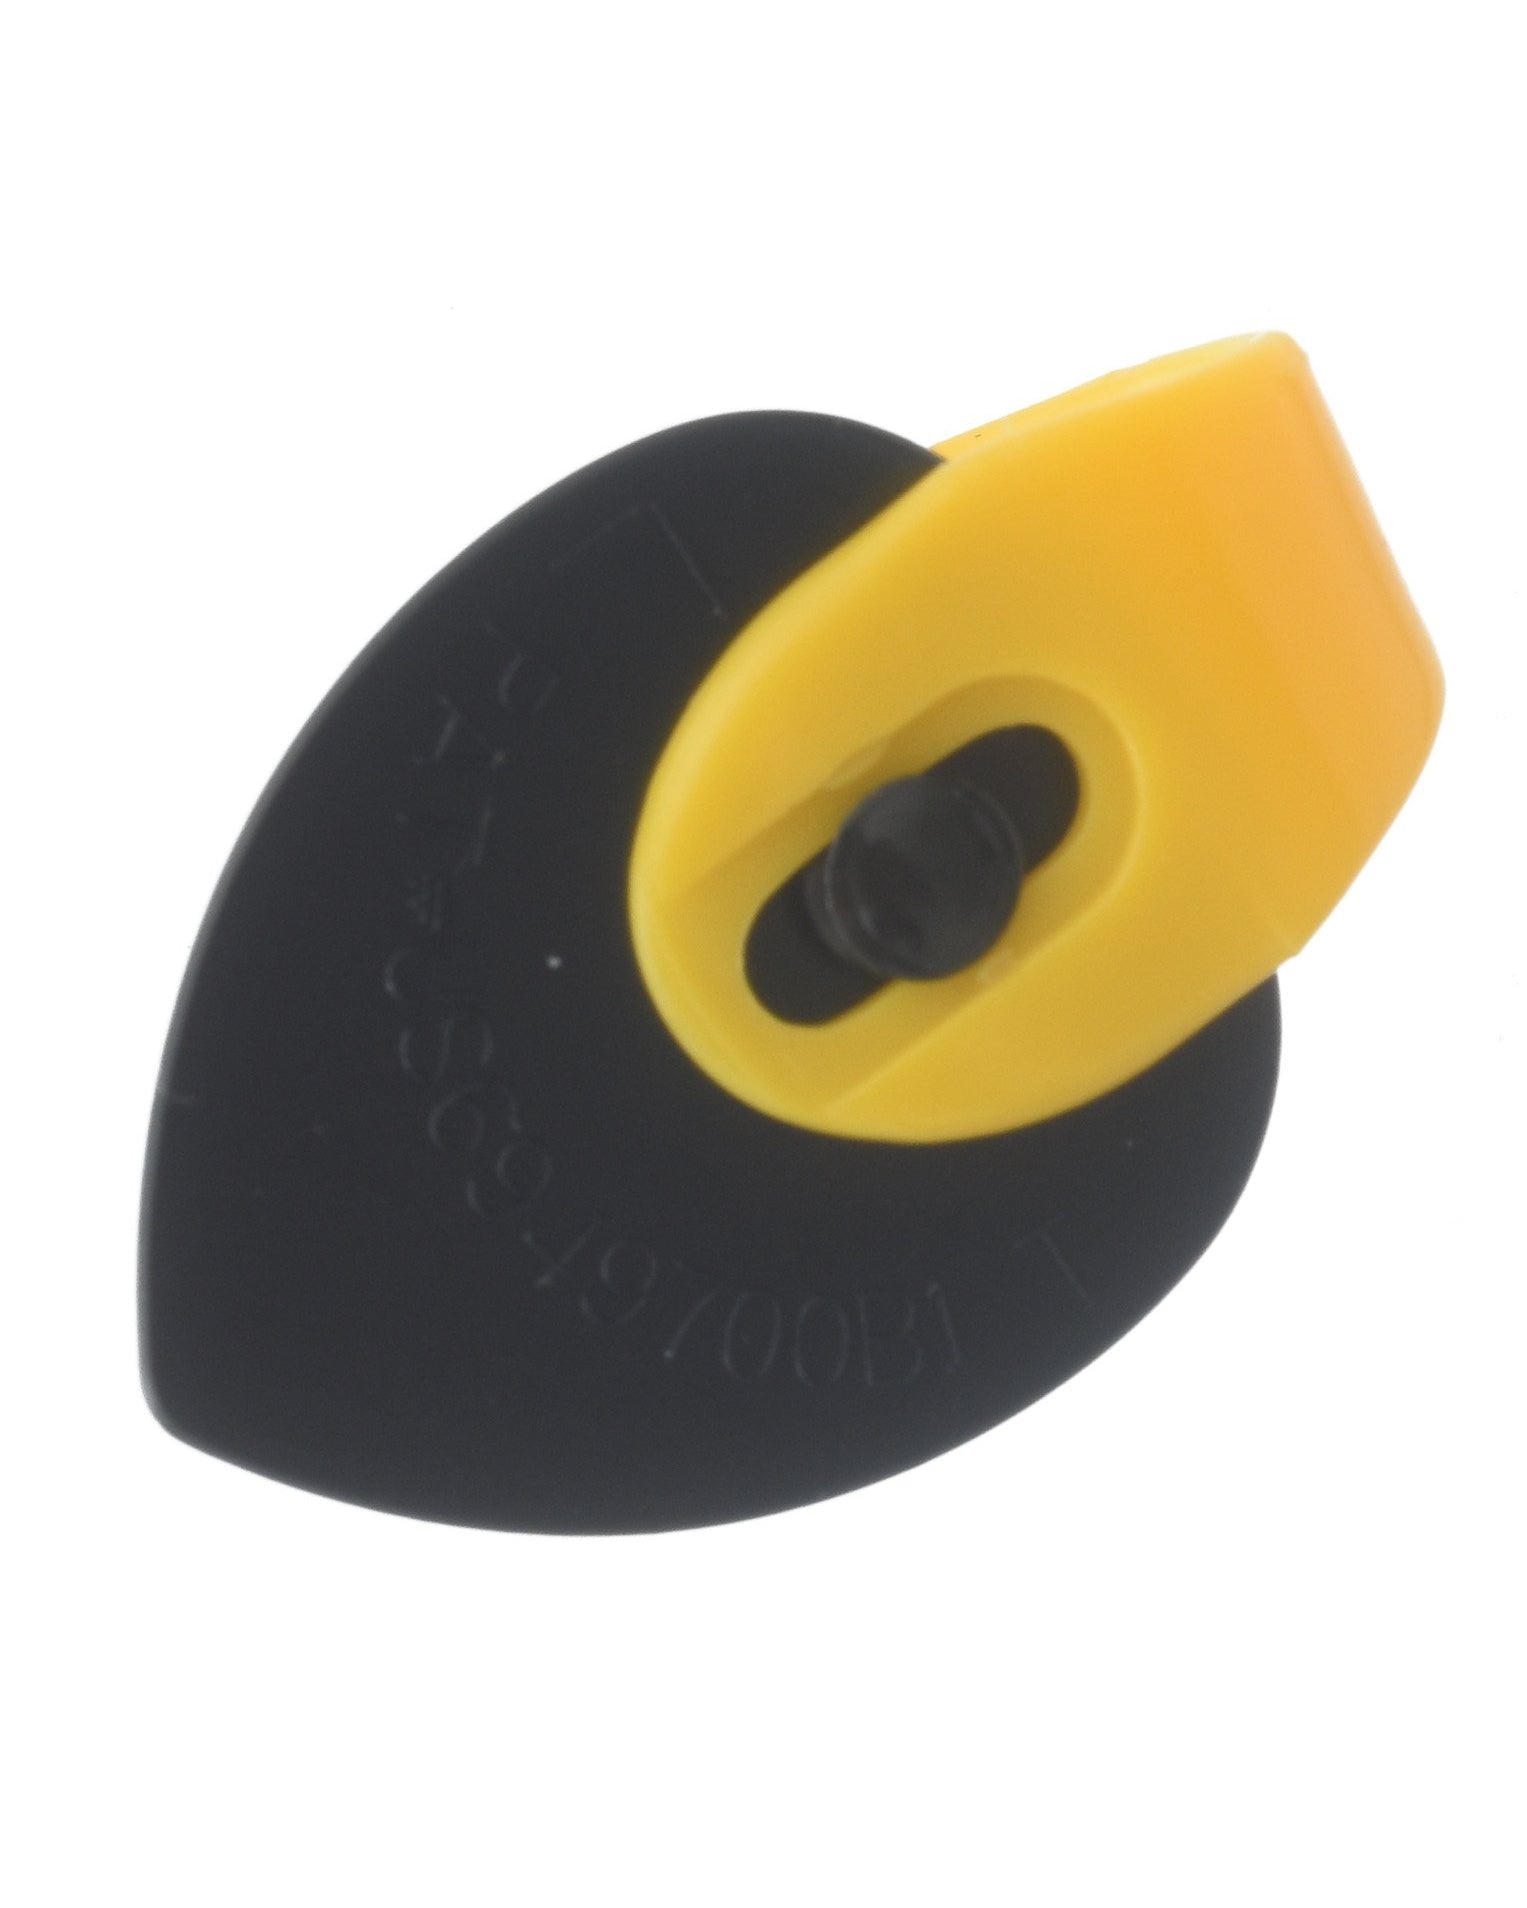 Image 1 of Fred Kelly Delrin Extra-Heavy Gauge Bumble Bee Teardrop Pick - SKU# PKBBT-XH : Product Type Accessories & Parts : Elderly Instruments